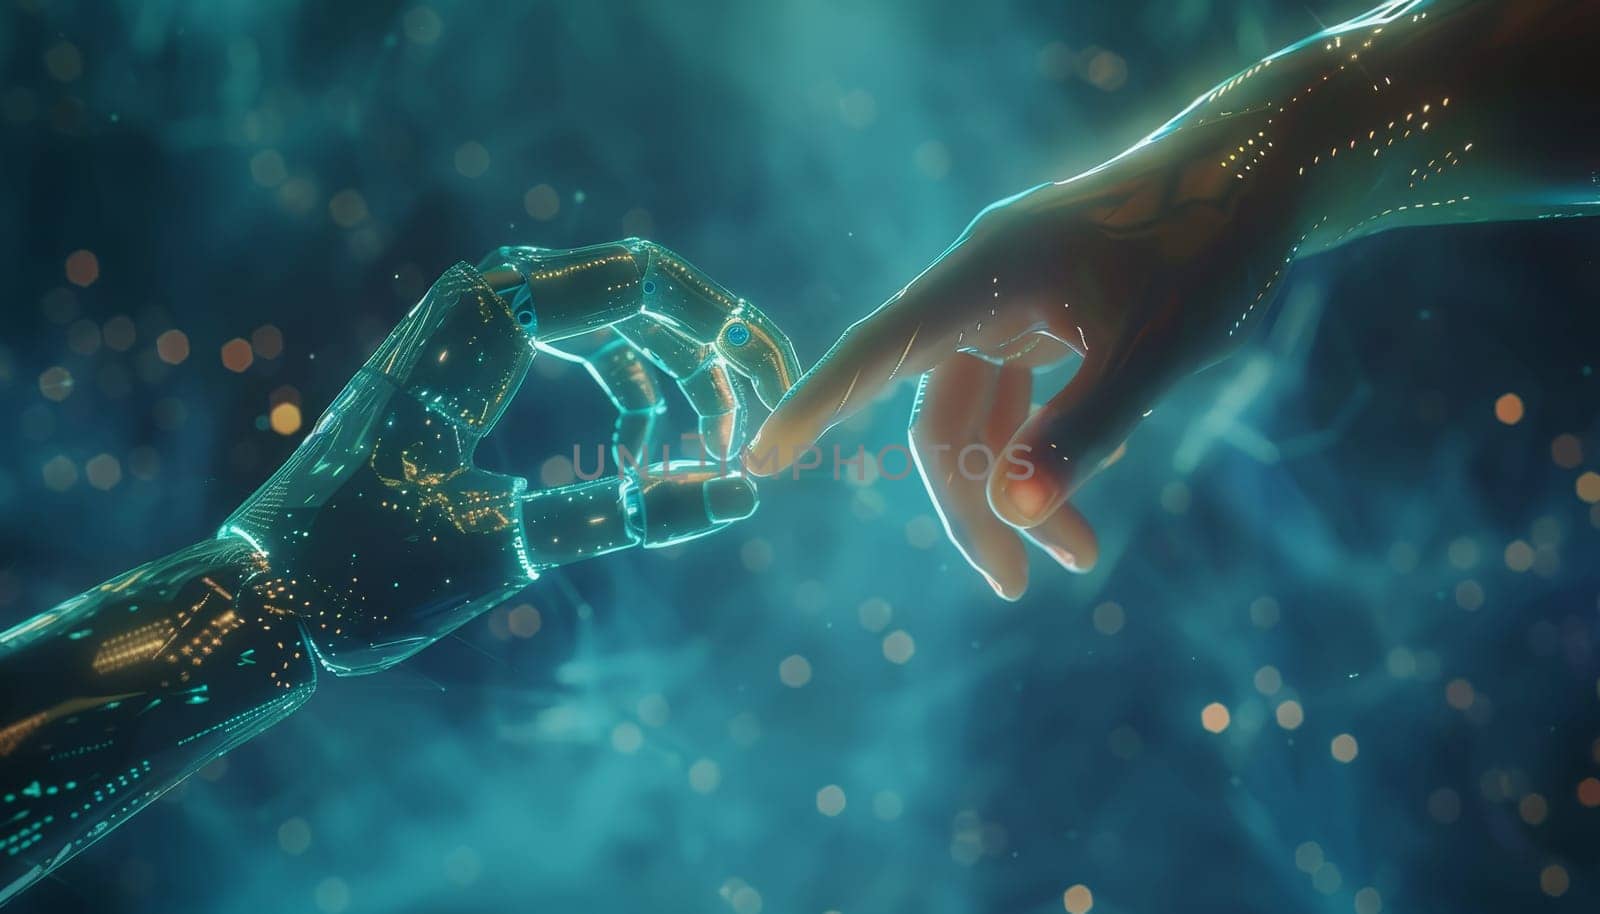 Robotic hands connecting with glowing energy, Concept of AI collaboration and technology by AI generated image.